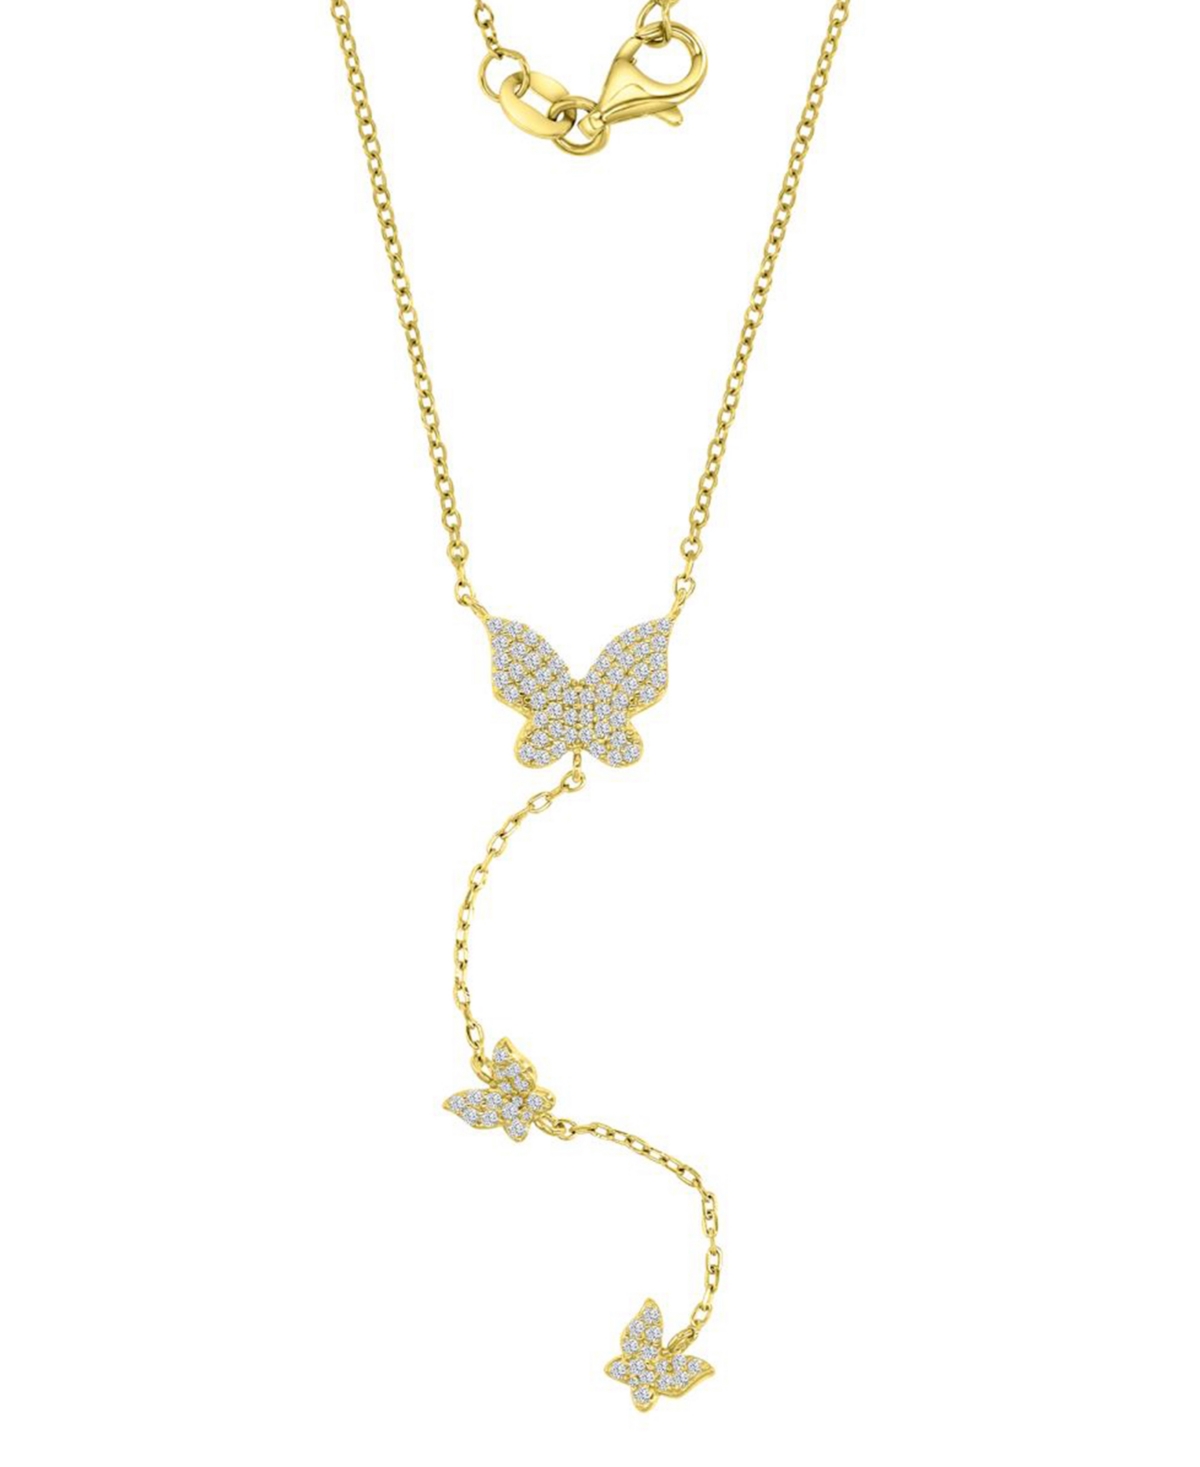 Cubic Zirconia Three Butterfly Lariat Necklace in 14k Gold-Plated Sterling Silver, 16" + 2" extender - Gold